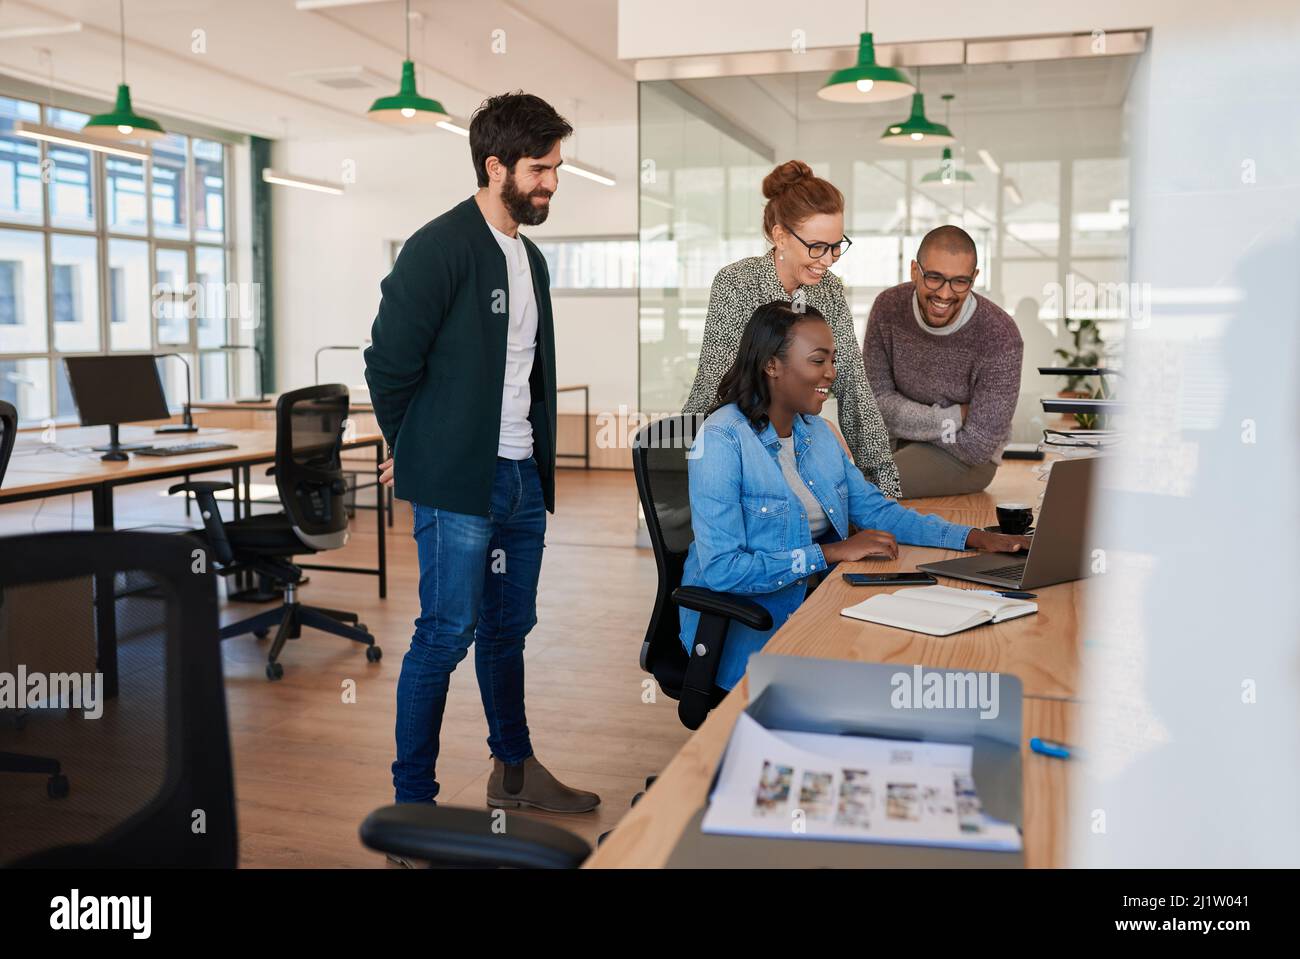 Smiling group of diverse businesspeople working together around a laptop Stock Photo